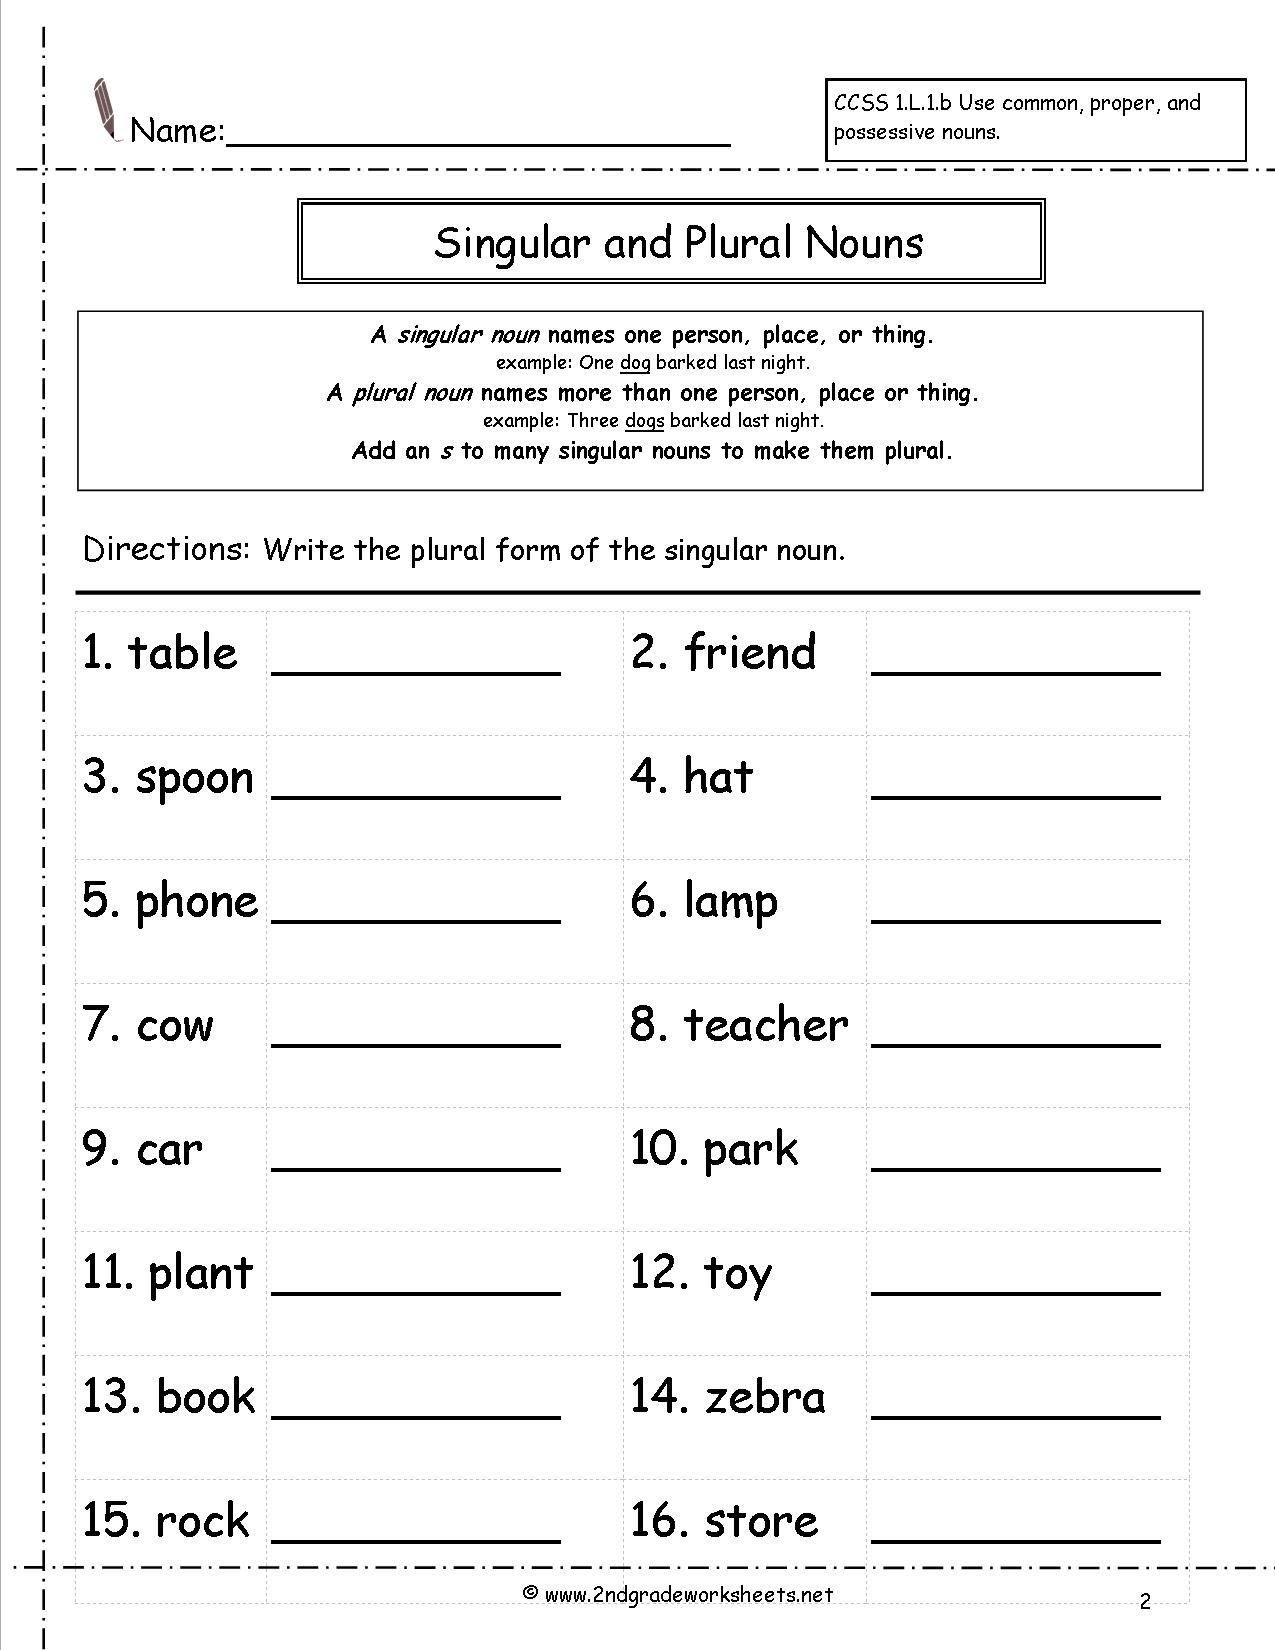 Singular And Plural Nouns With Matching Verbs Worksheets